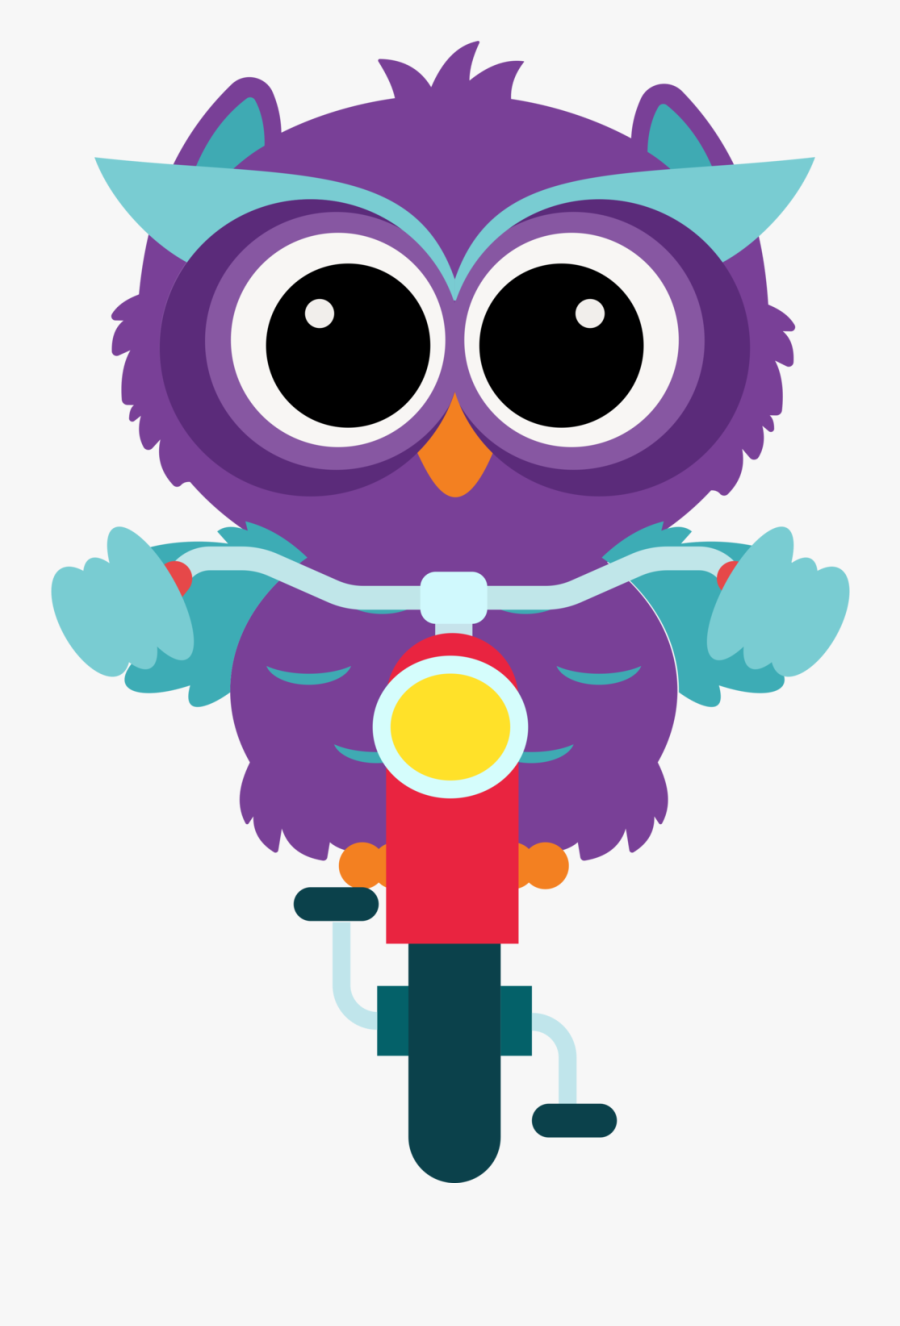 Huey-7 - Design Animated Owl Png, Transparent Clipart